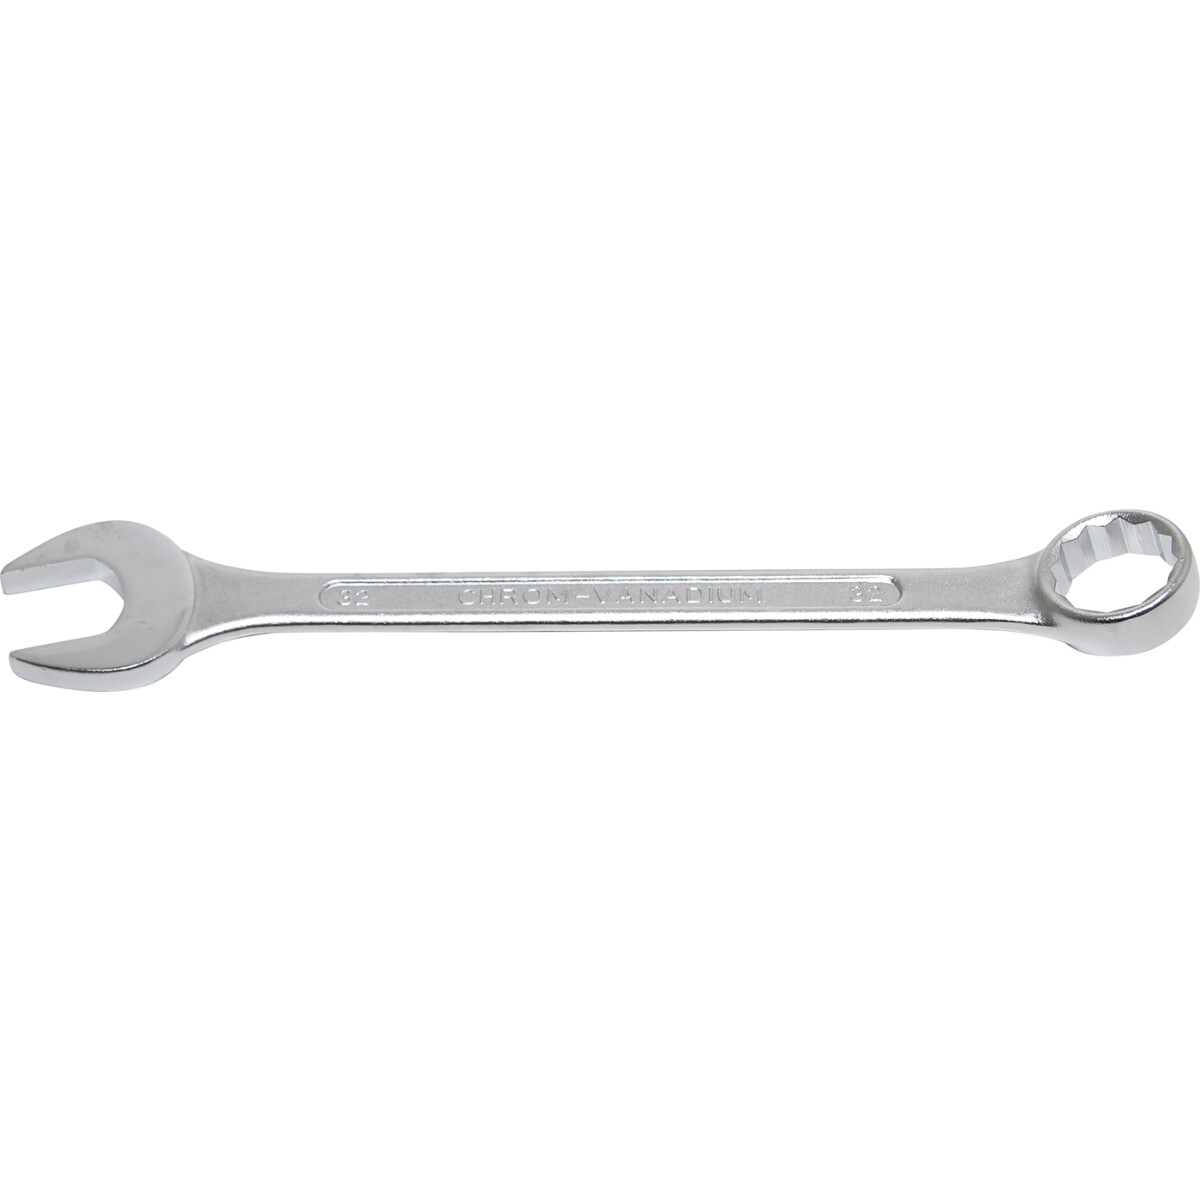 BGS Combination Spanner | 32 mm (BGS 1082)